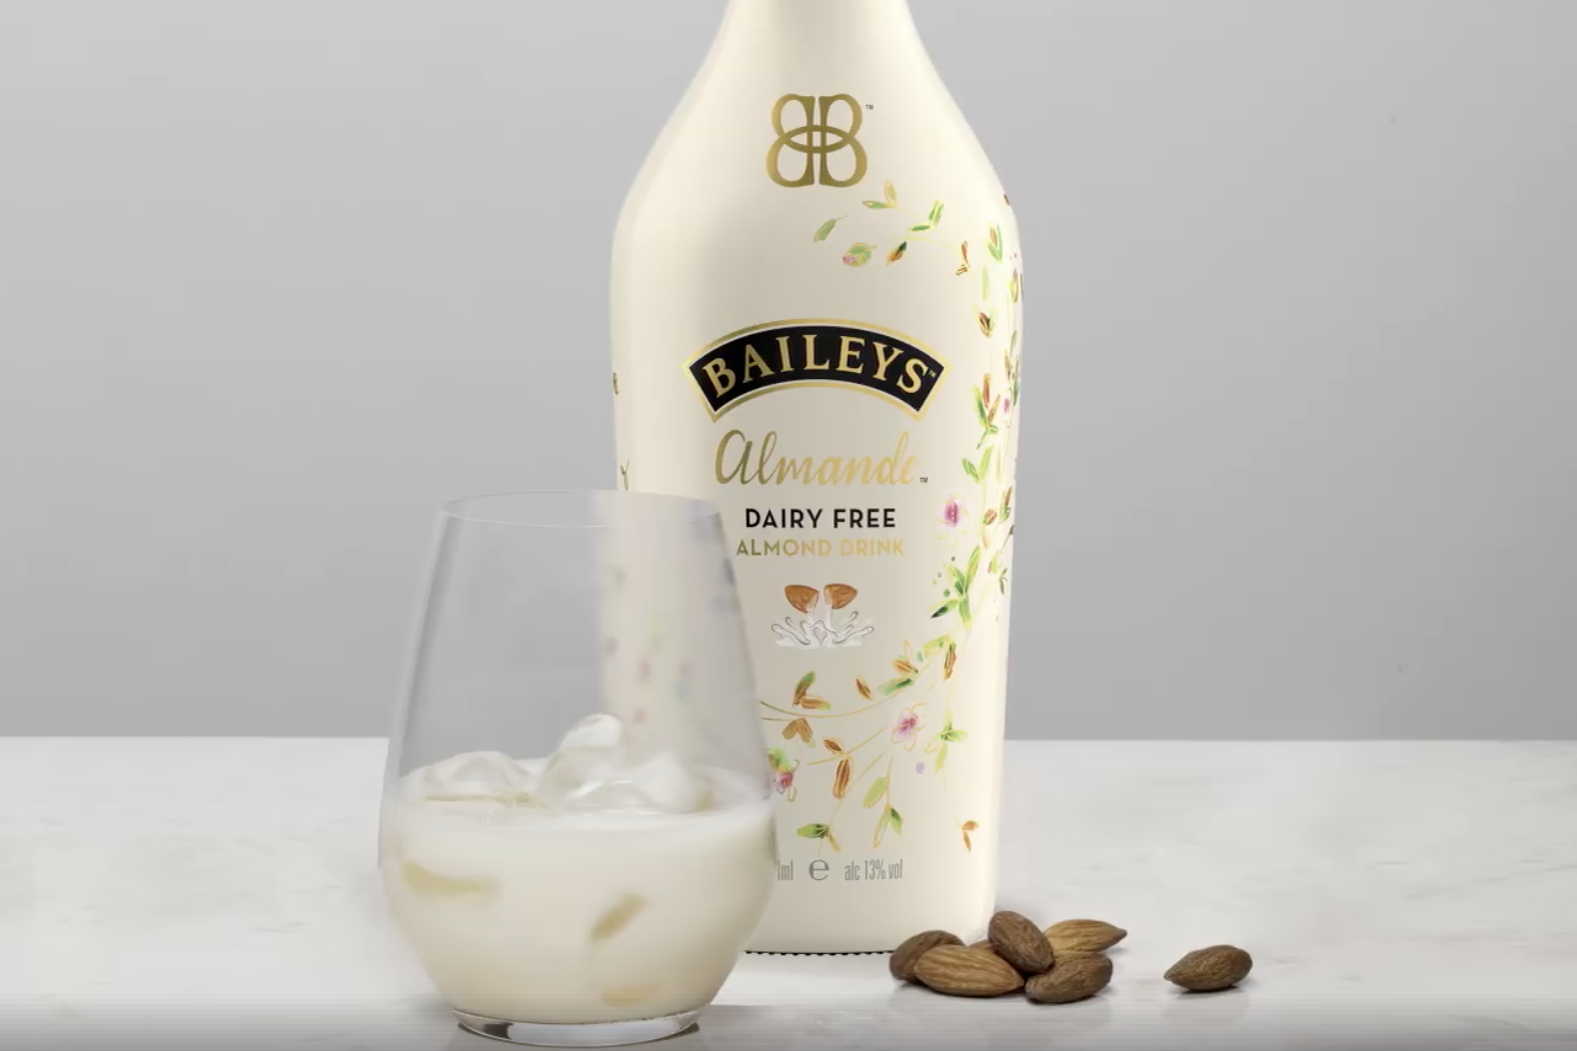 Vegan Baileys Almande is now available to buy in major supermarkets across the UK